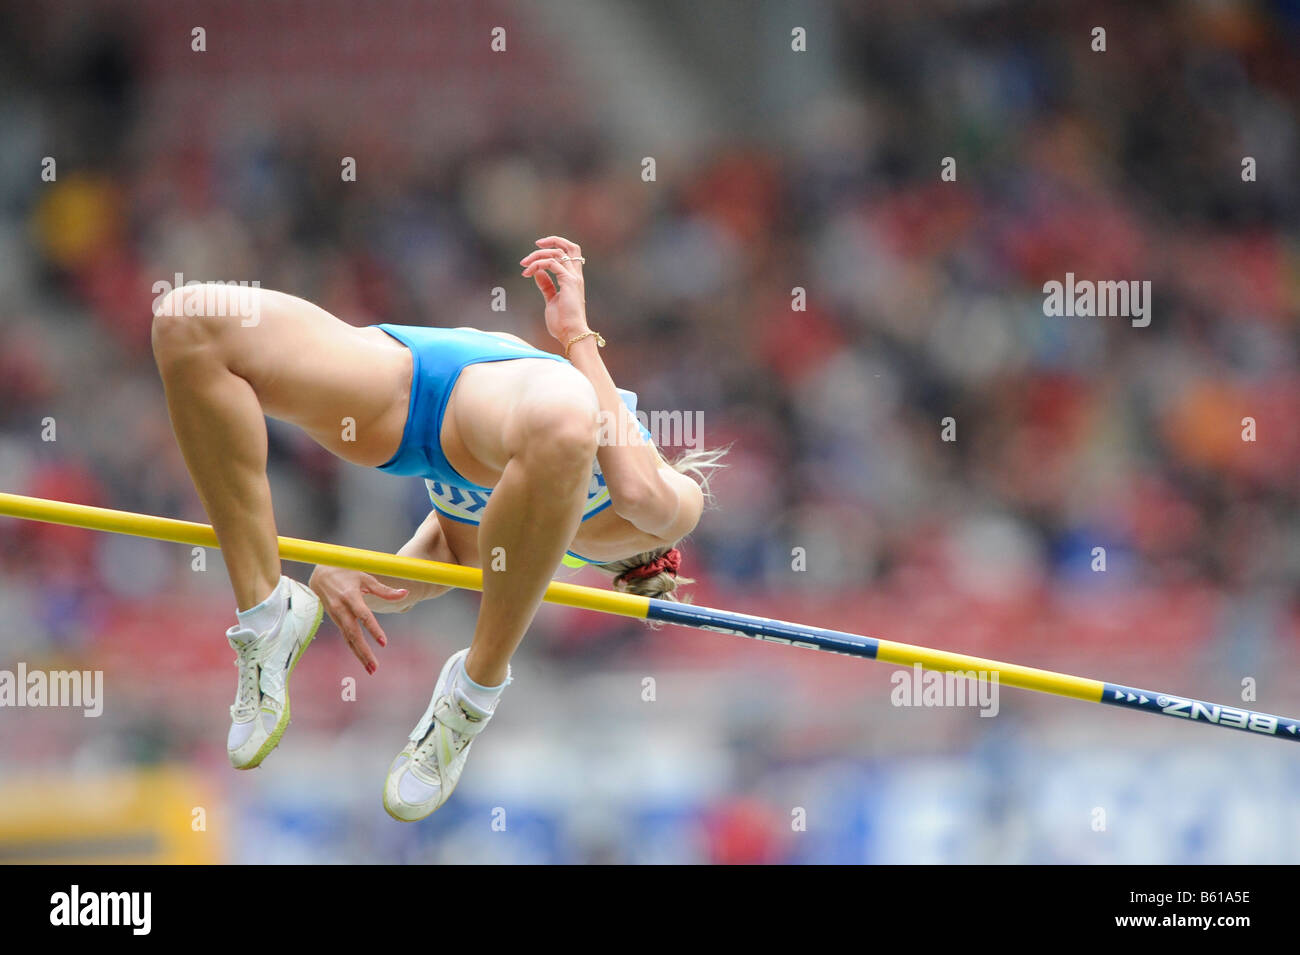 Marina AITOVA, KAZ, hits the crossbar, High Jump, at the IAAF 2008 World Athletics Final for track and field in the Stock Photo